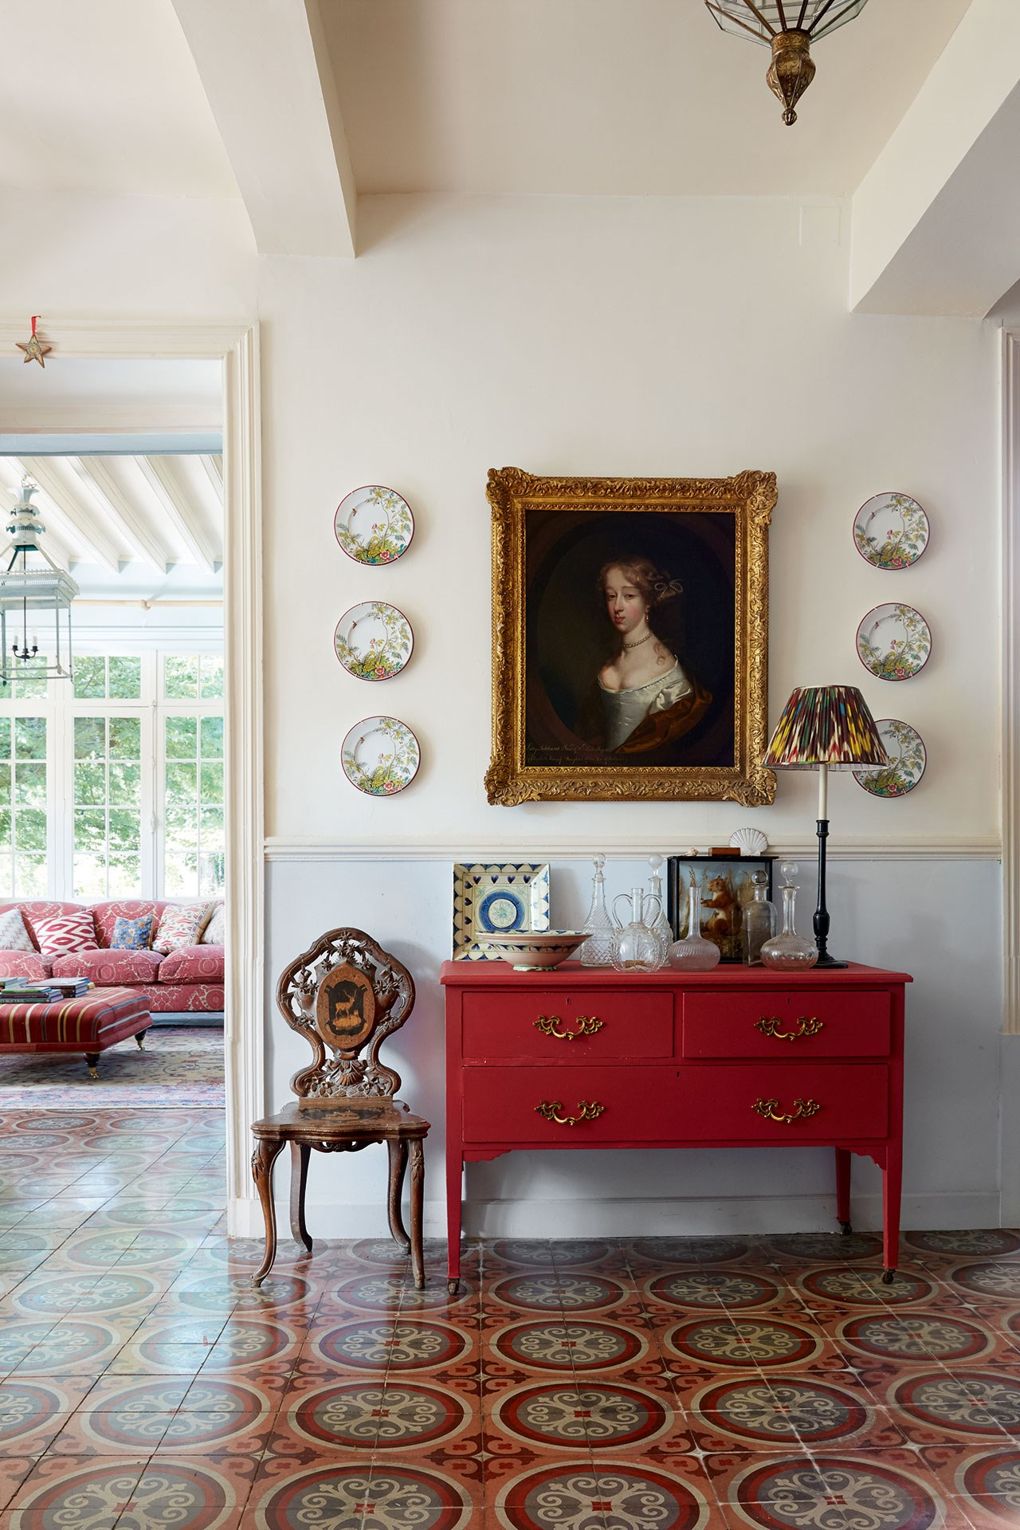 Tile Floors in the French Country Home of Textiles Dealer Susan Deliss